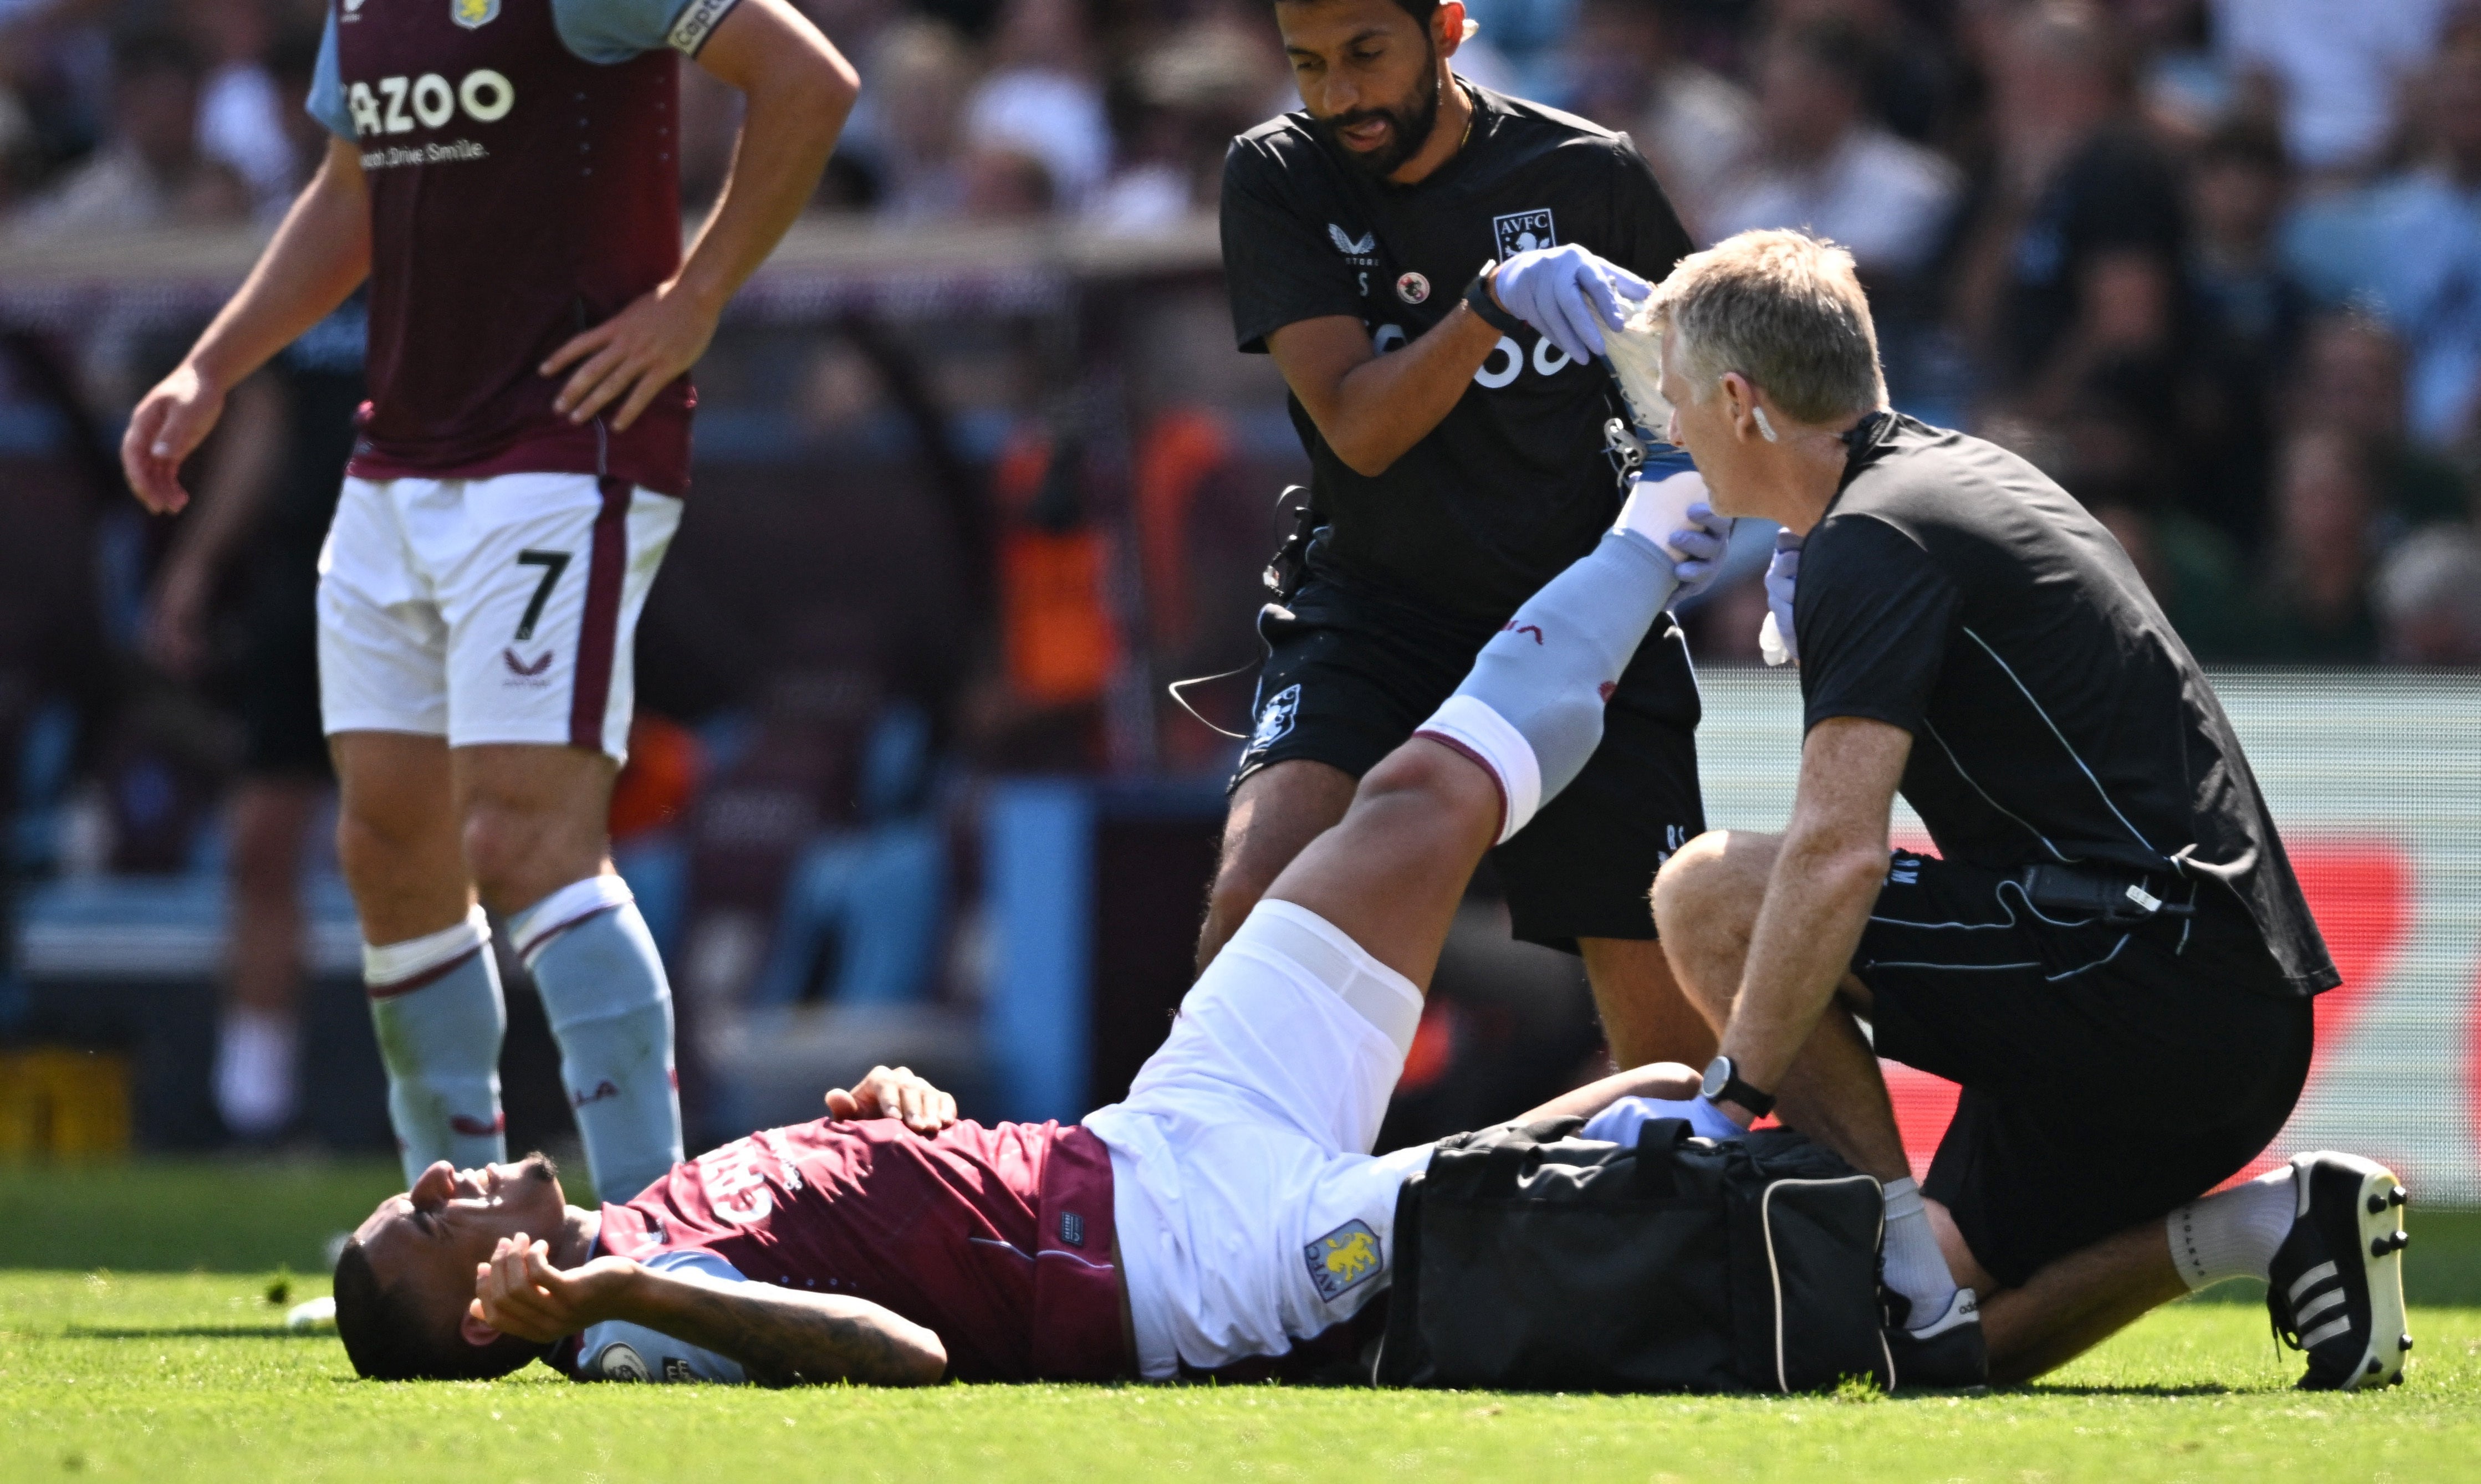 The defender suffered the injury against Everton on Saturday